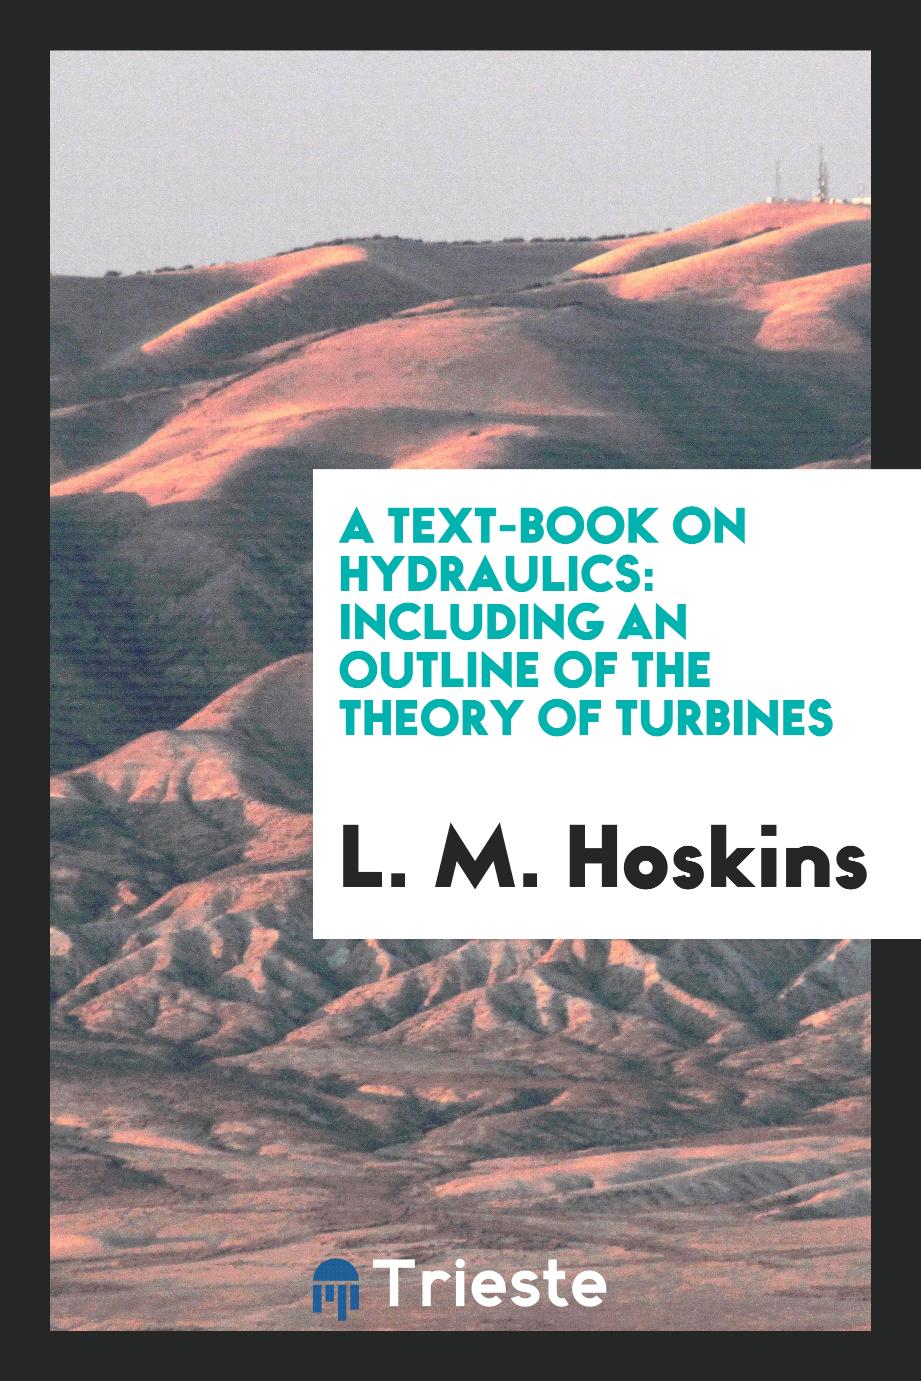 A Text-Book on Hydraulics: Including an Outline of the Theory of Turbines